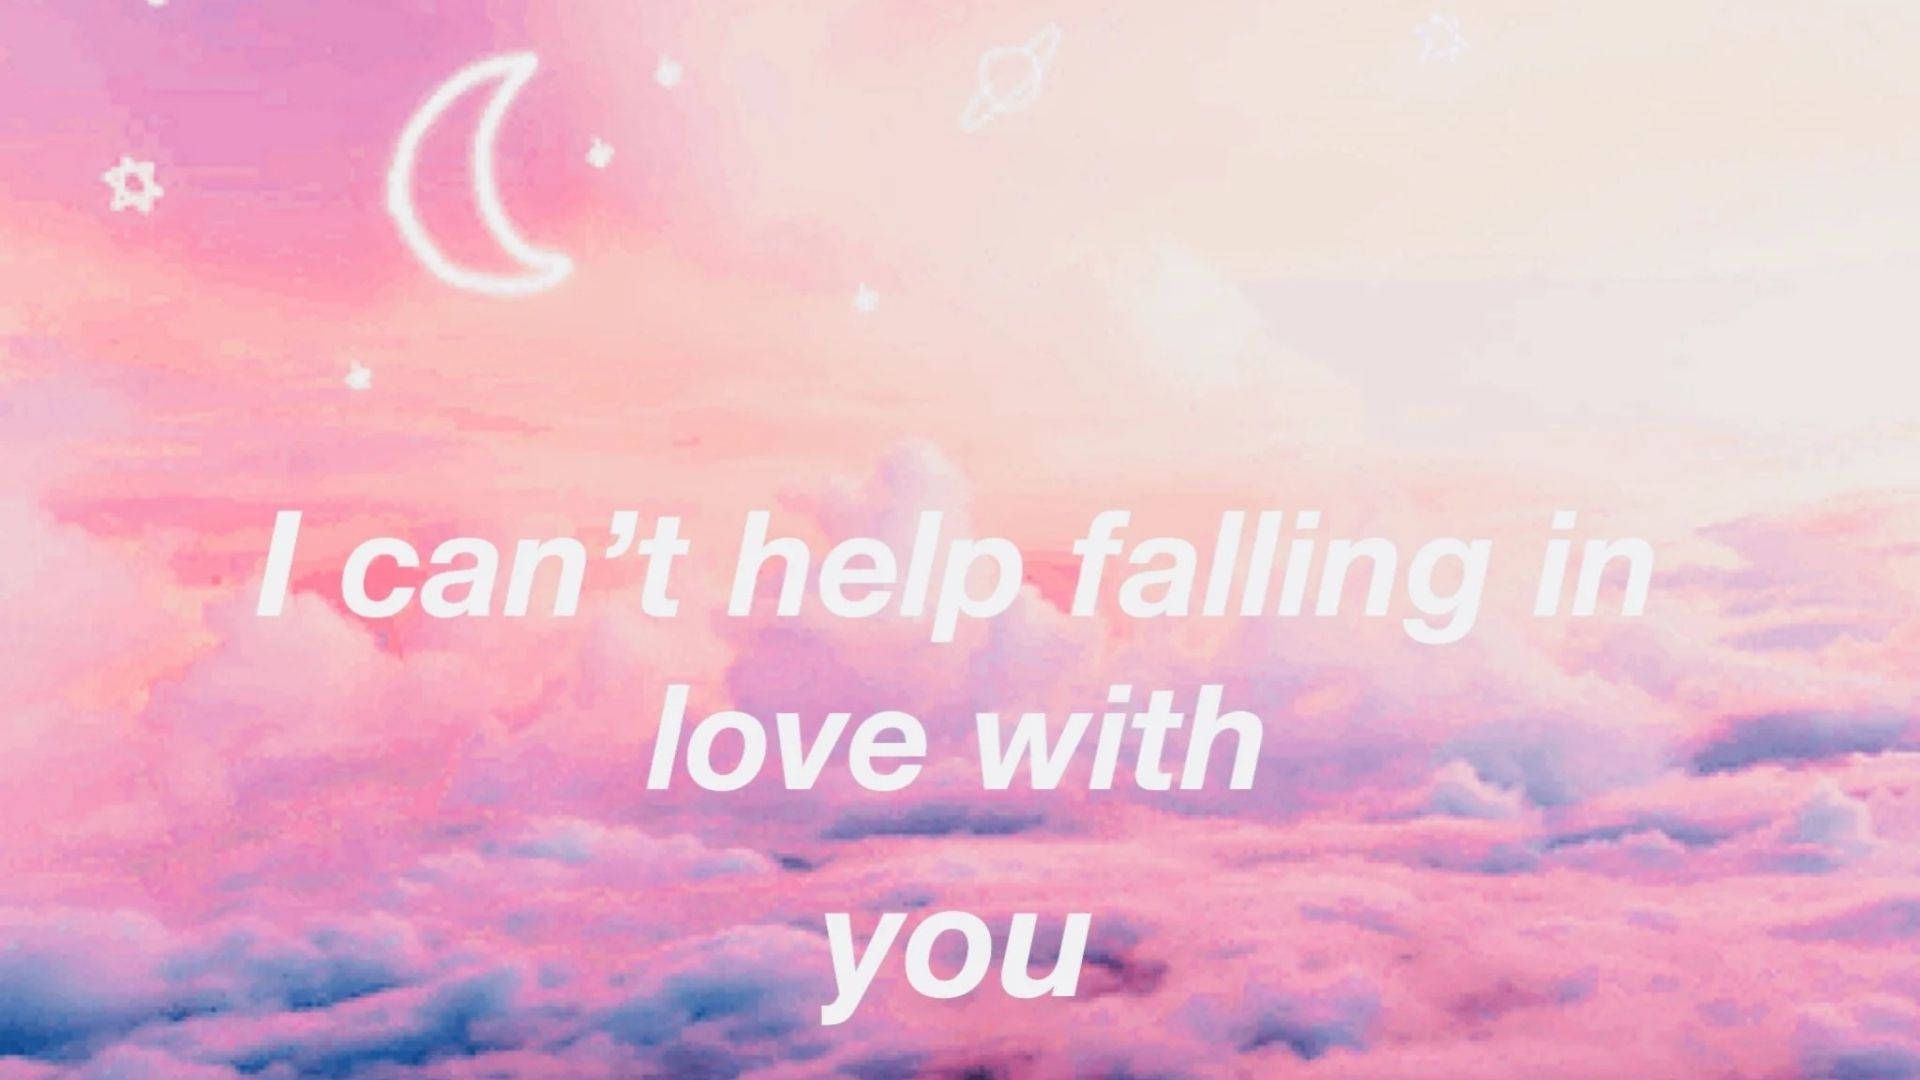 I can't help falling in love with you - Love